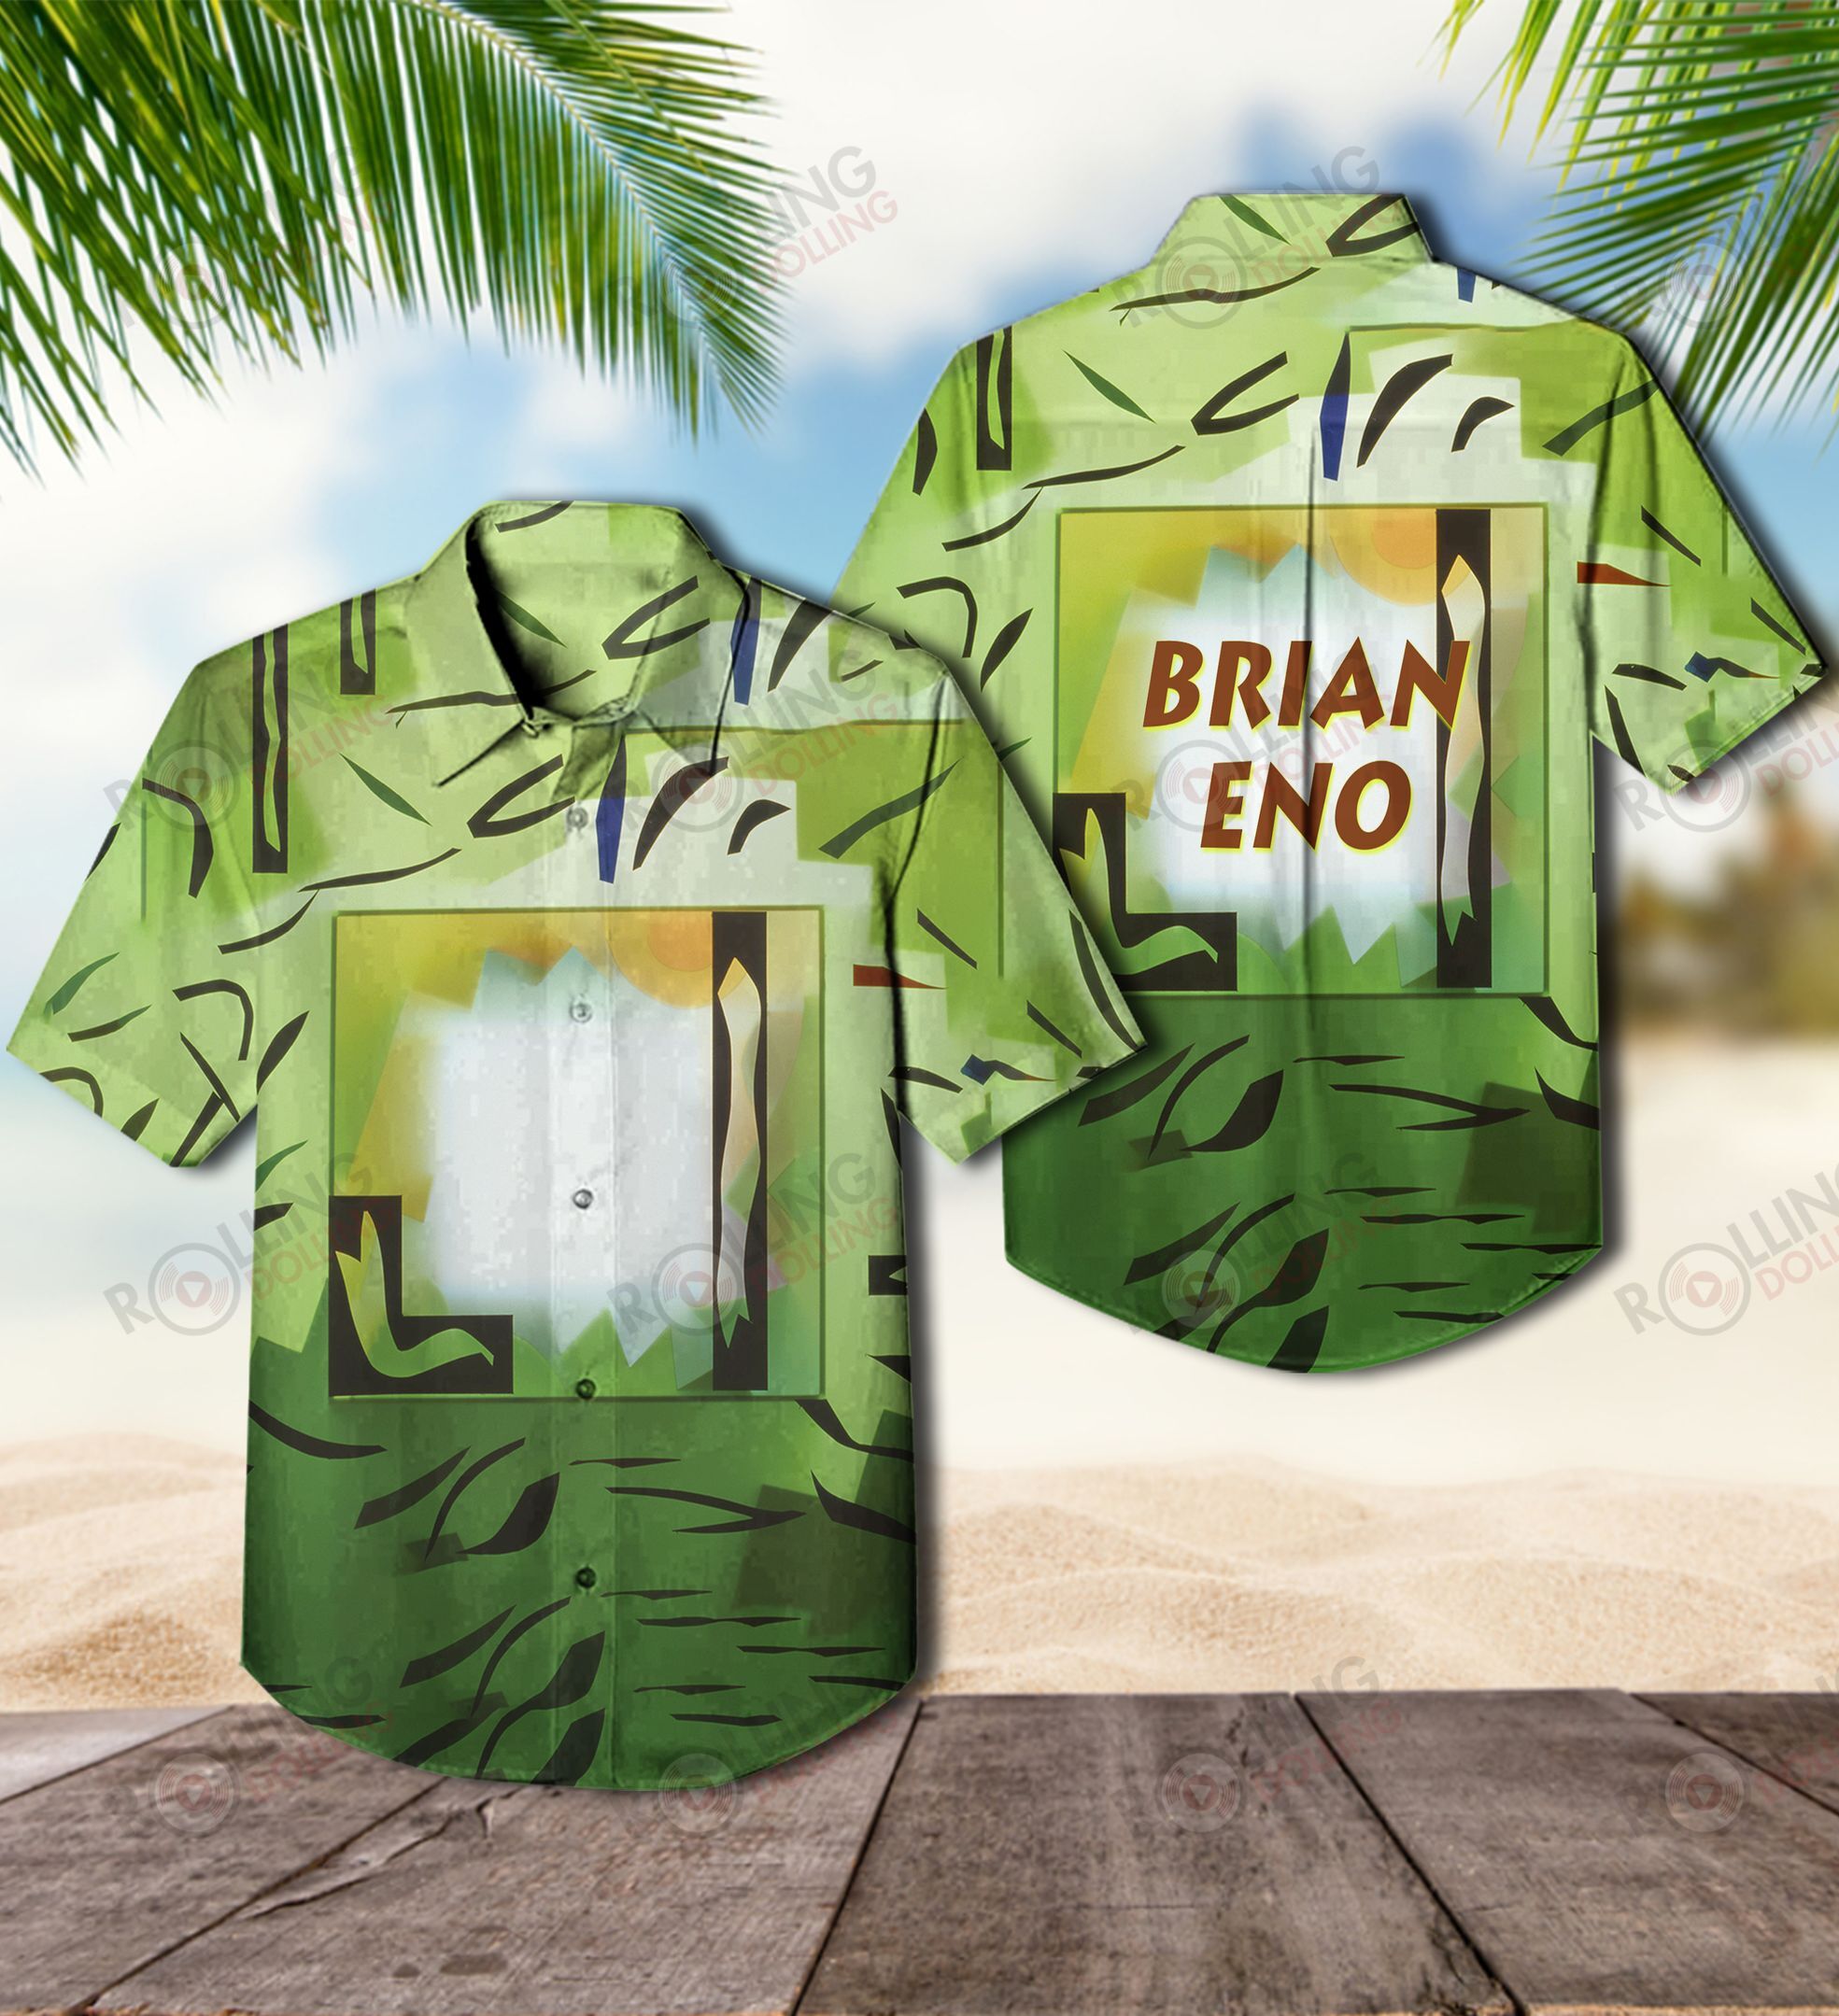 Now you can show off your love of all things band with this Hawaiian Shirt 91